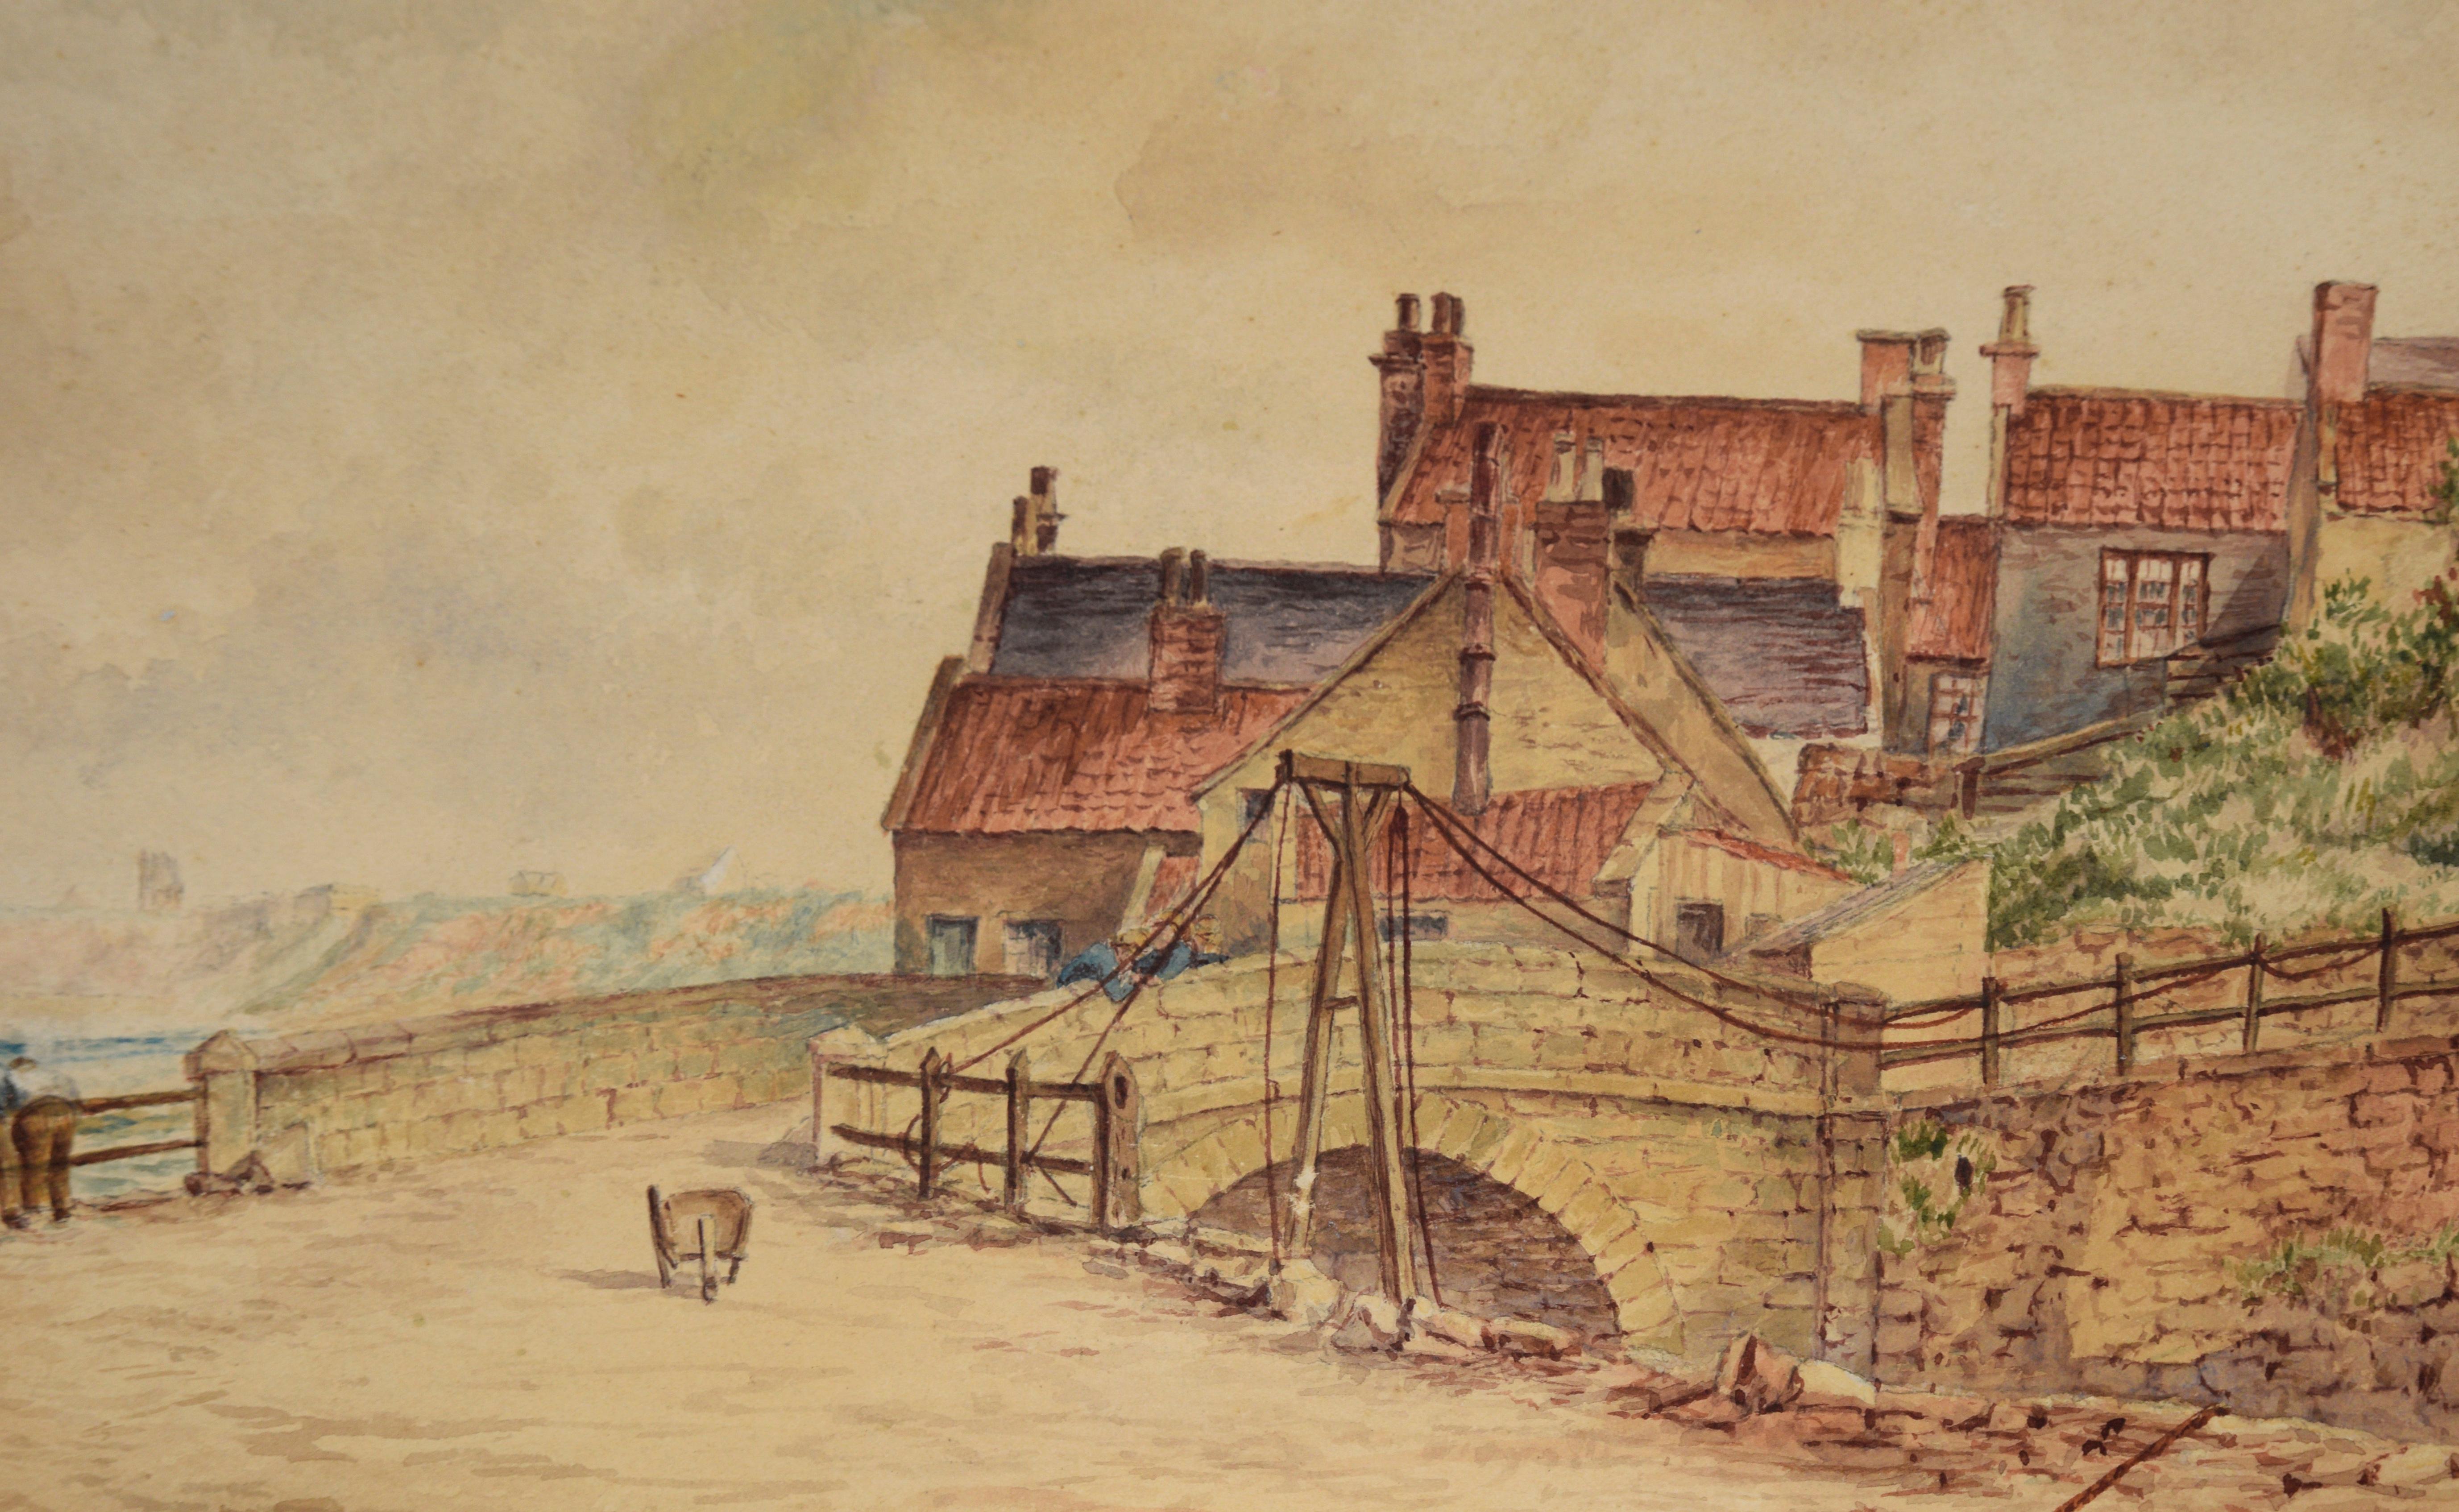 English Country Landscape - Watercolor on Paper

Watercolor painting depicting an American country landscape by Oliver Louis Tweddle (English, B-1860). Four fishermen stand upon a bridge, with multicolored countryside cottages to the right of the